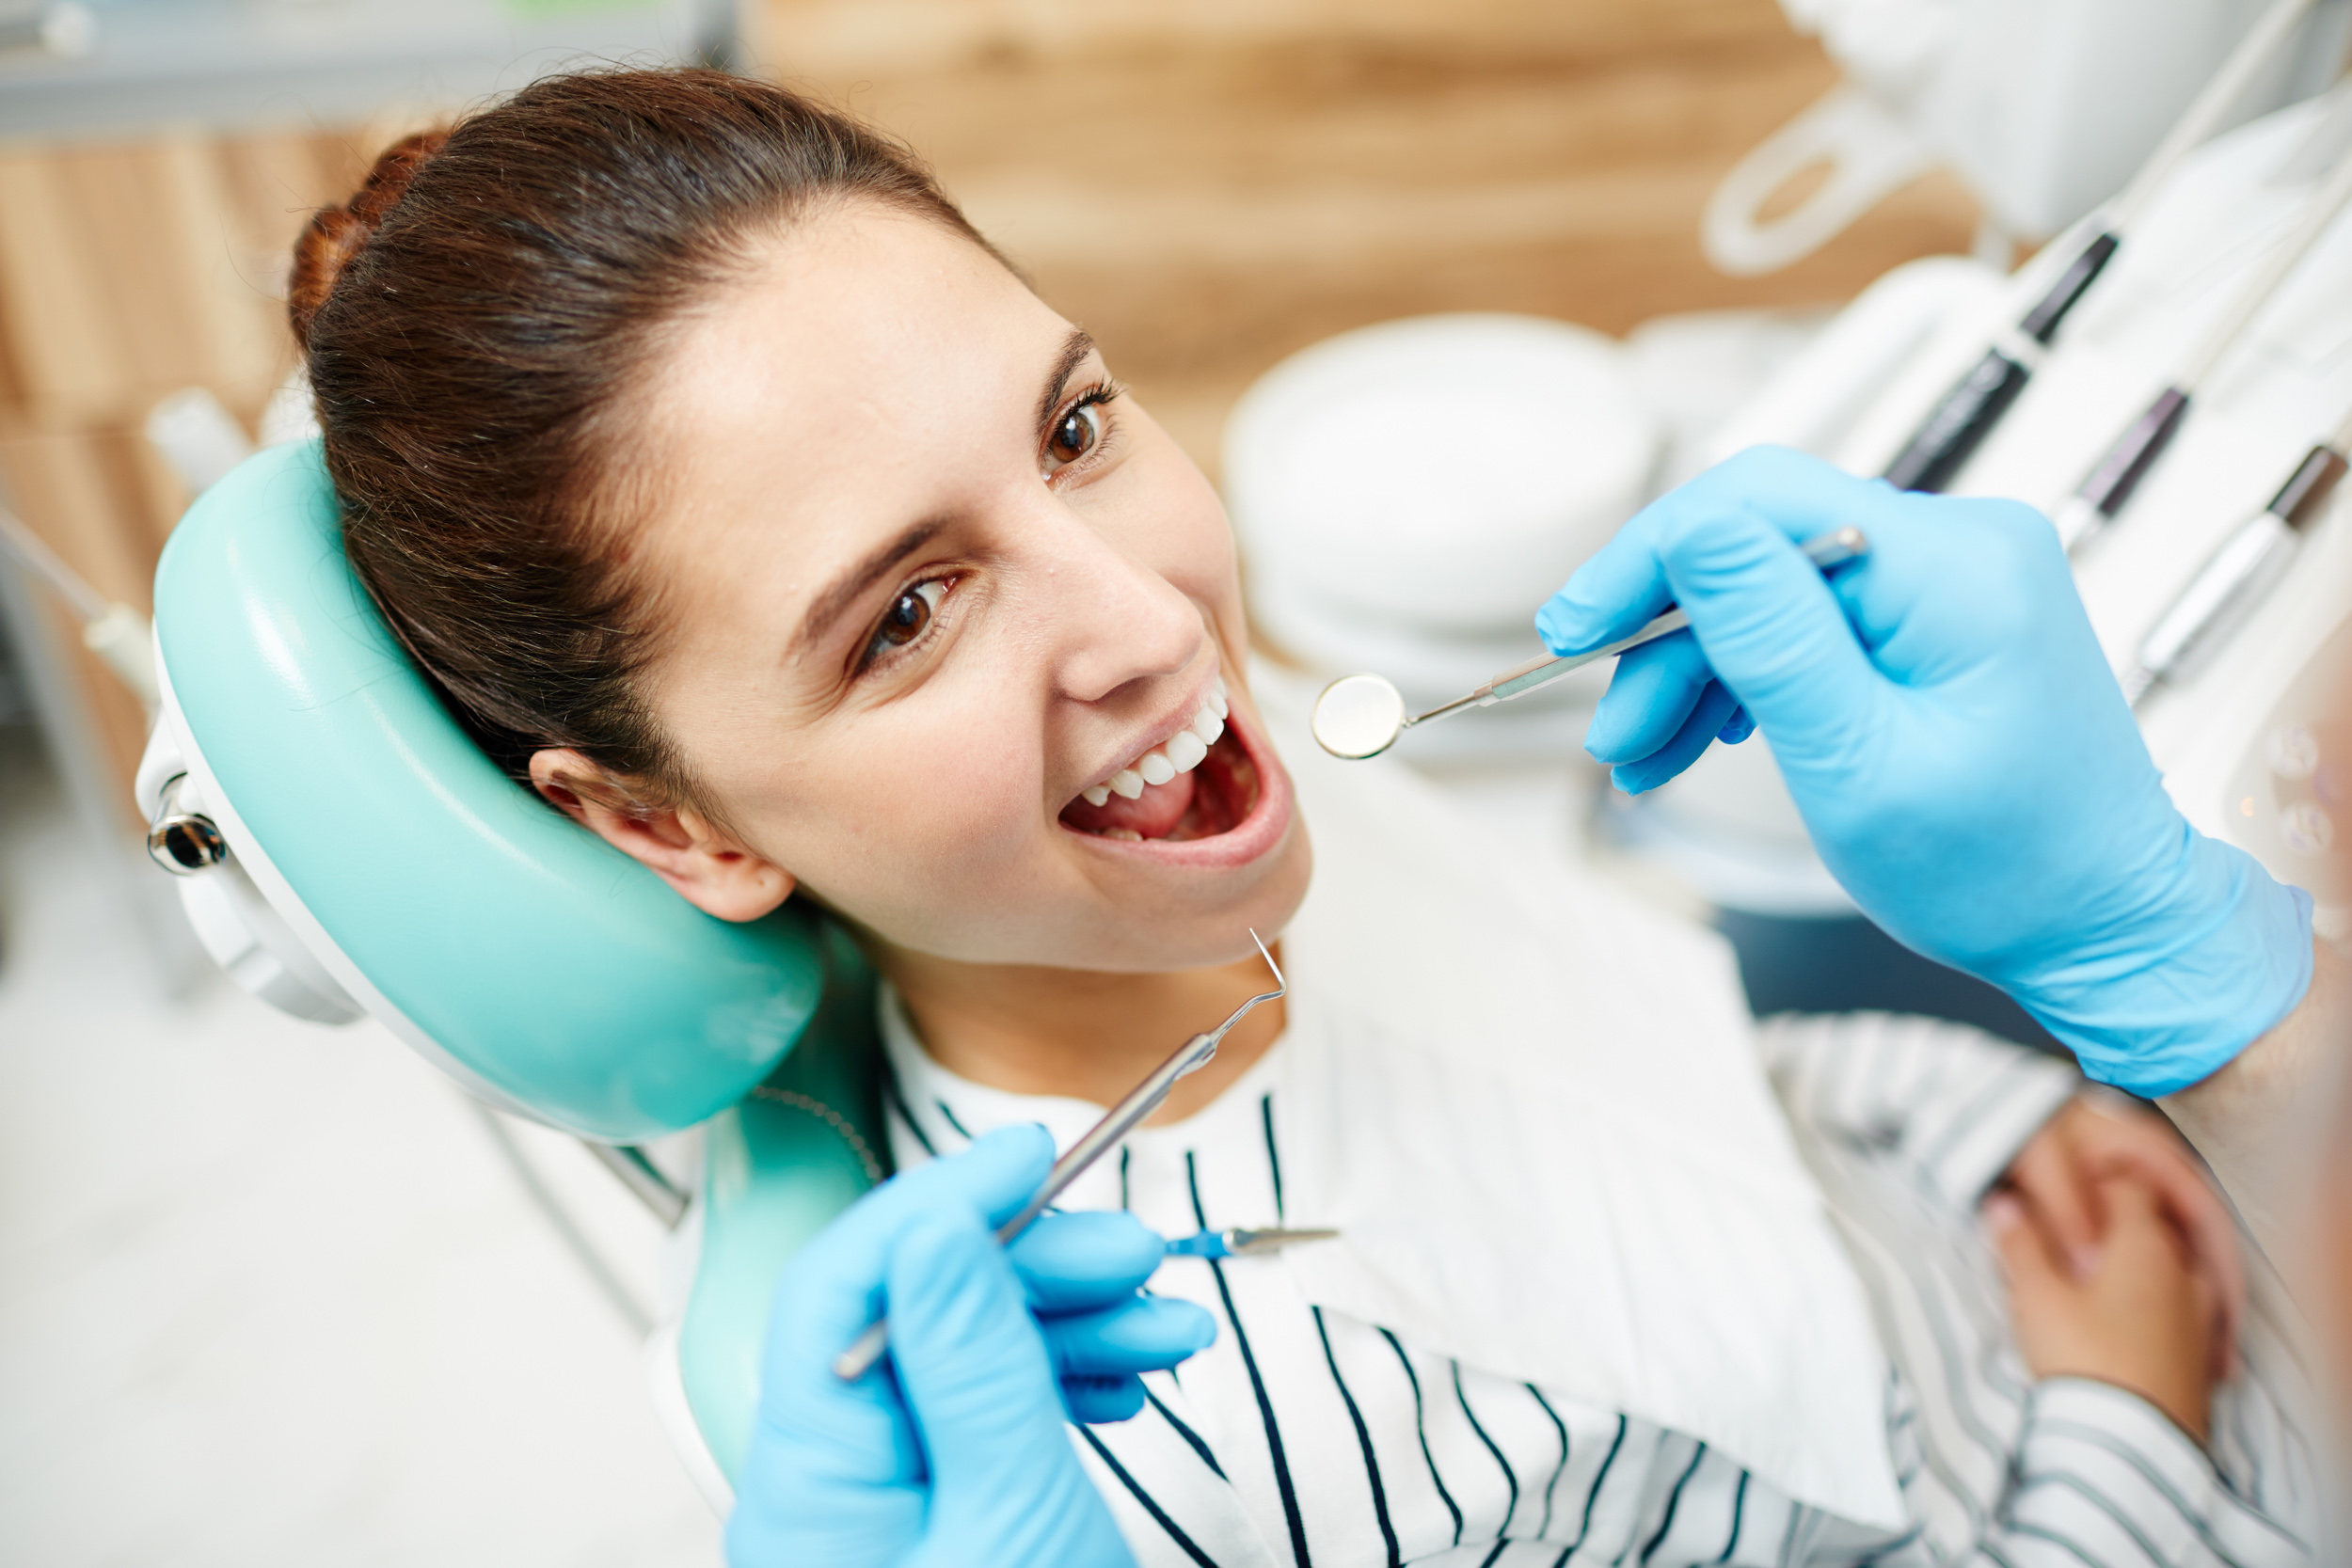 cosmetic dentistry options in Maryville, TN